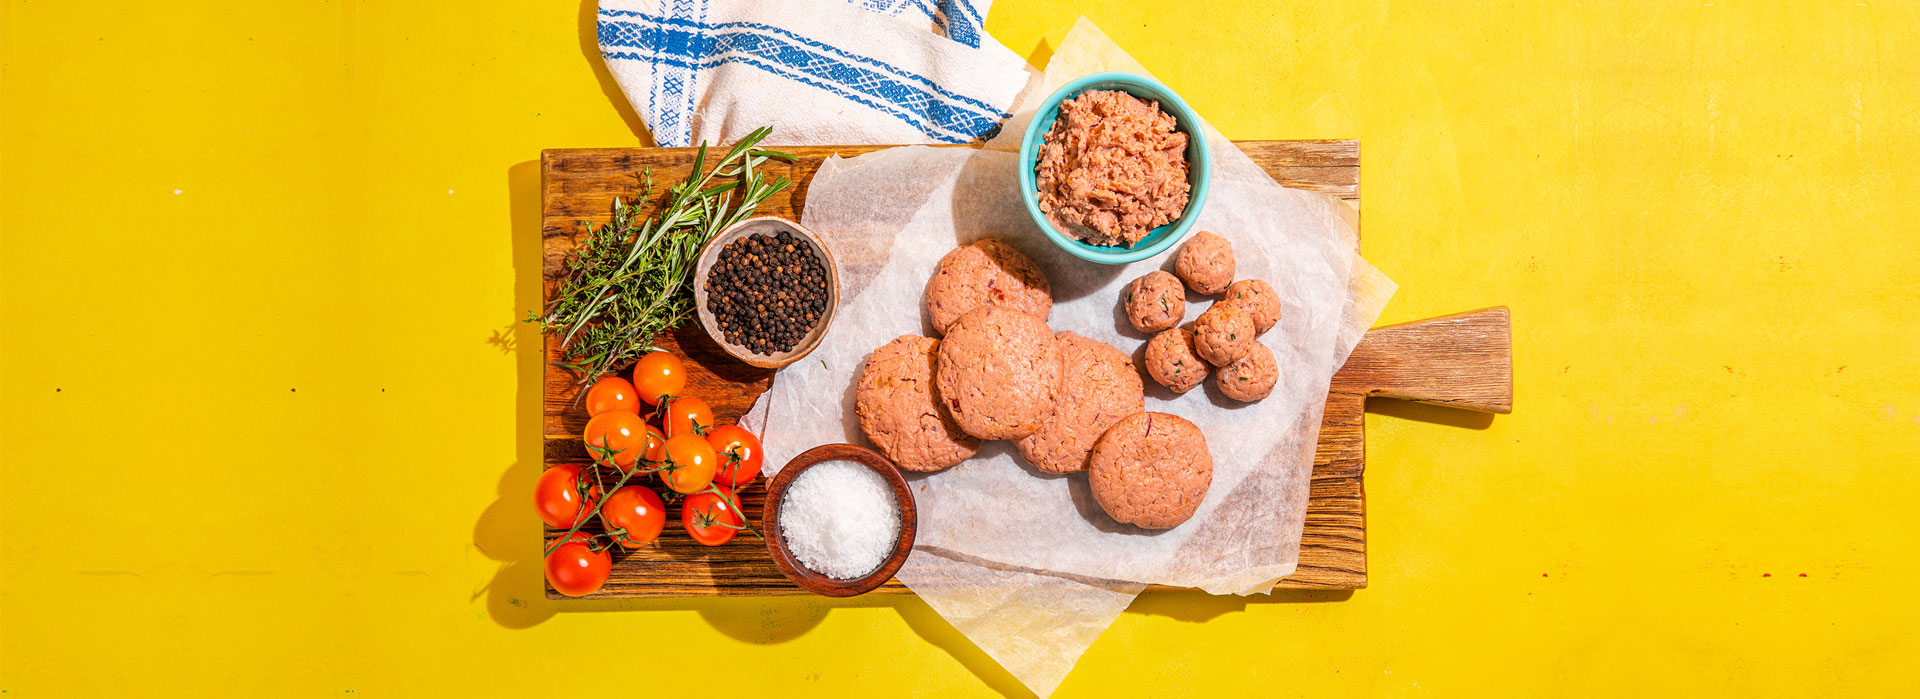 Raw plant-based meat made from jackfruit